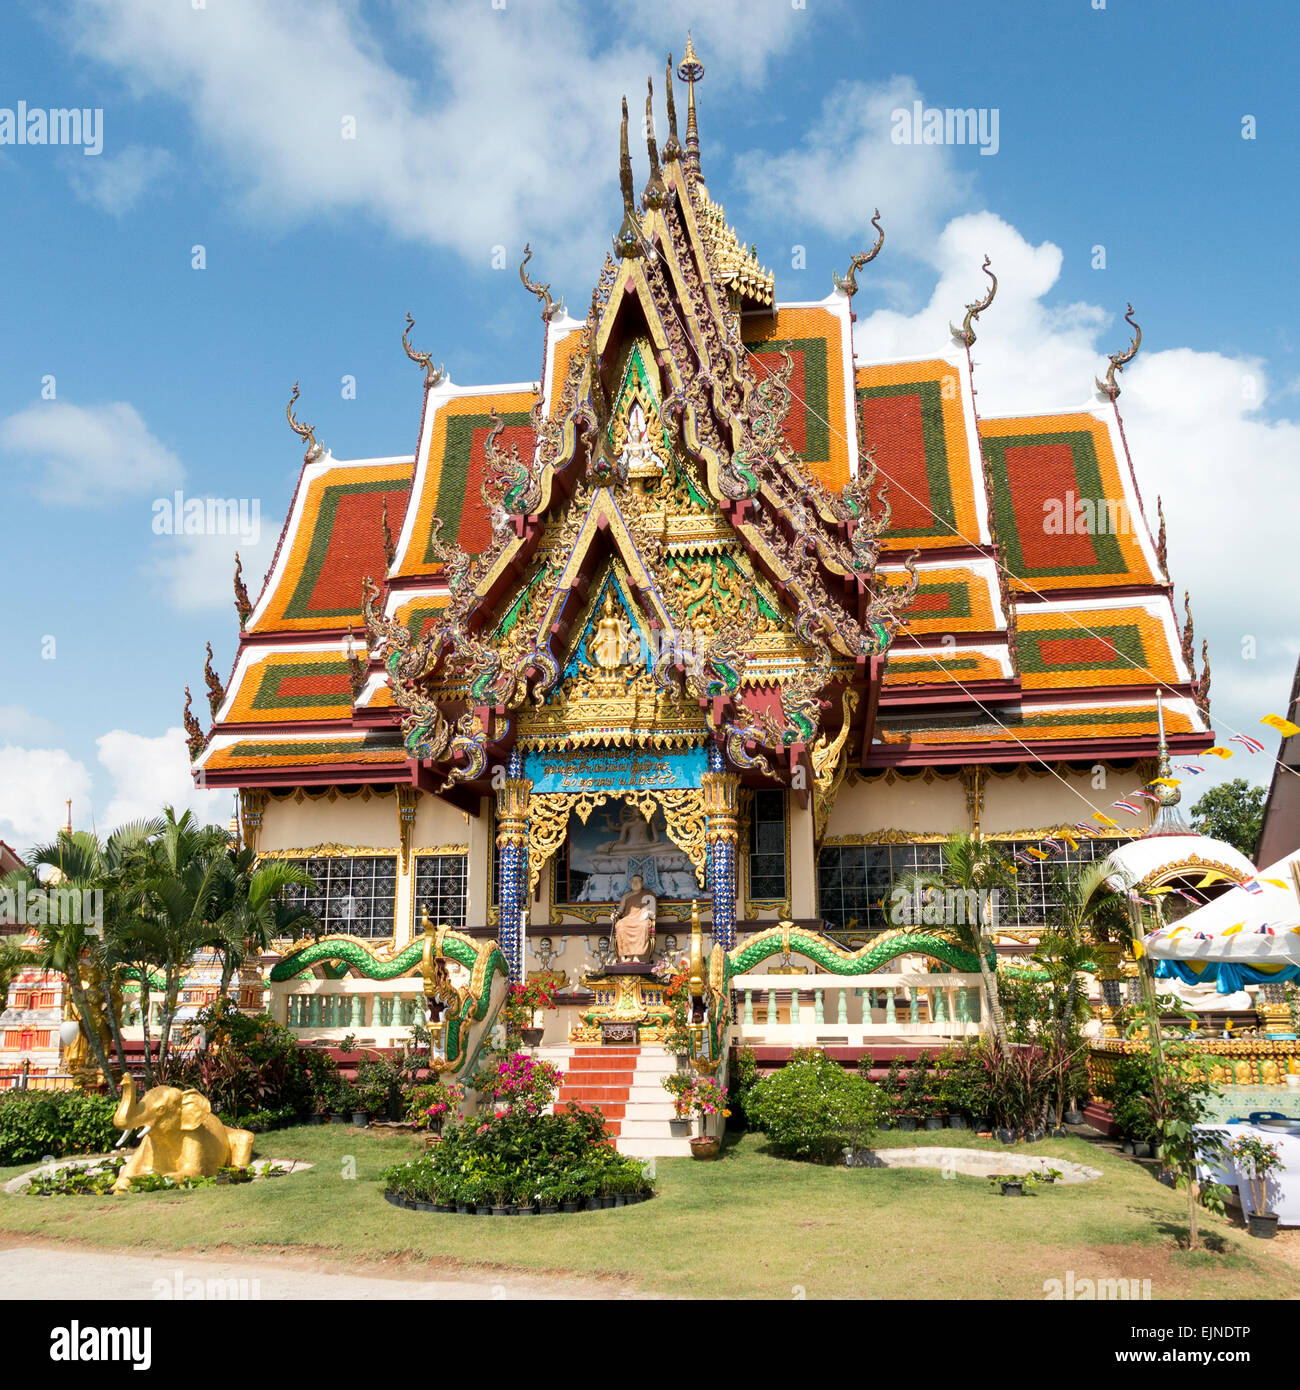 One of the modern and colourful Temples at Wat Plai Laem on Koh Samui Stock Photo